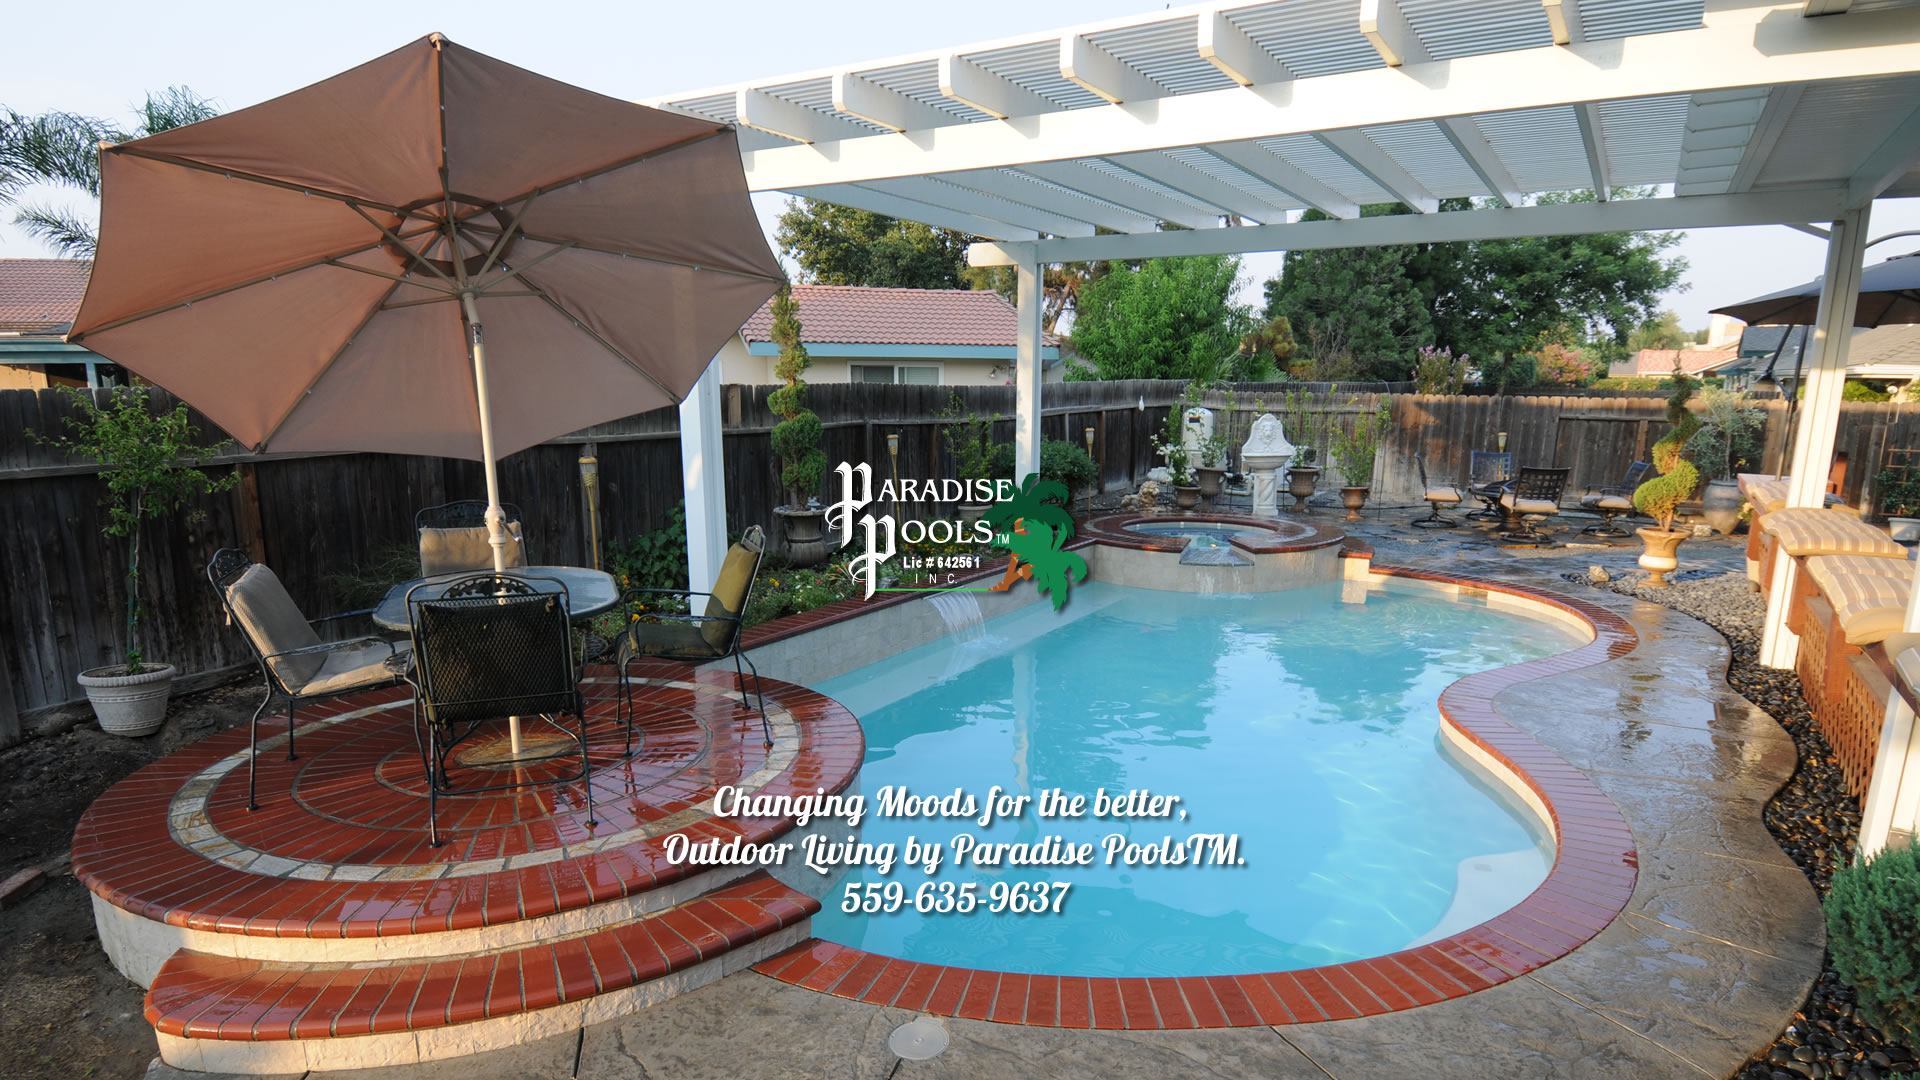 Changing Moods for the better, Outdoor Living by Paradise PoolsTM.